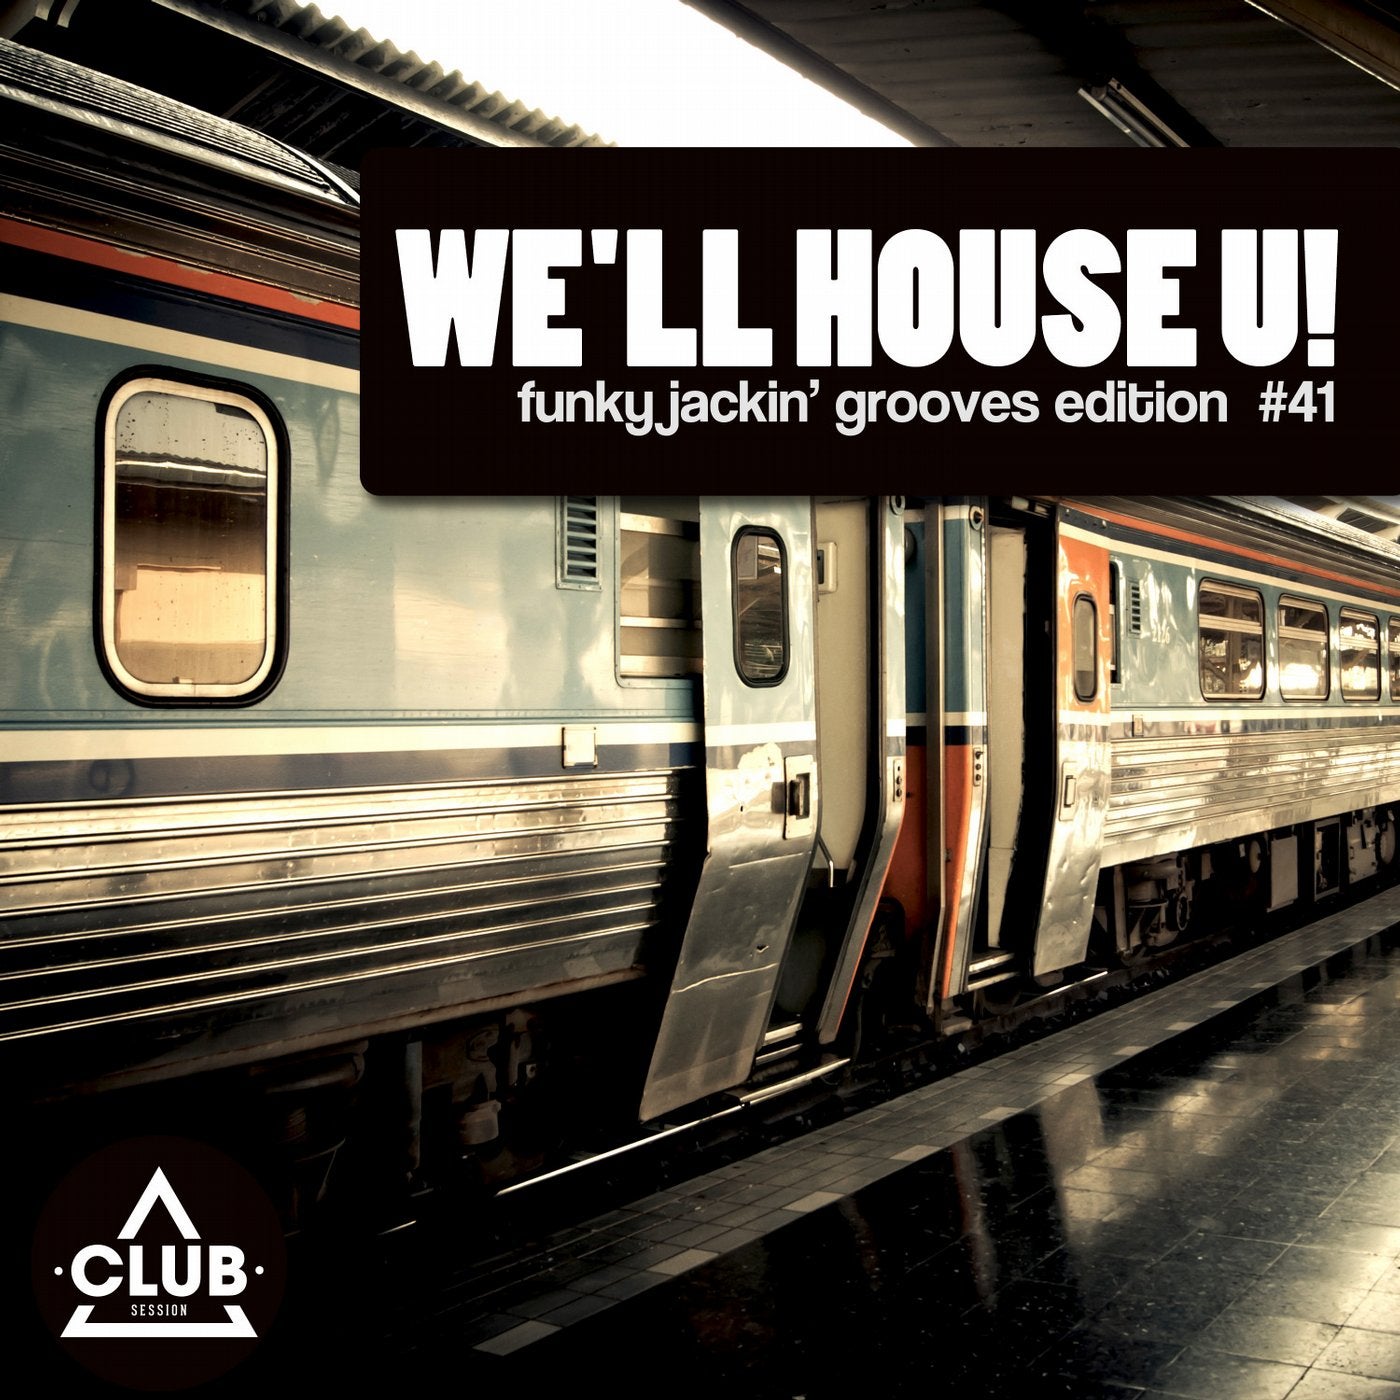 We'll House U! - Funky Jackin' Grooves Edition Vol. 41